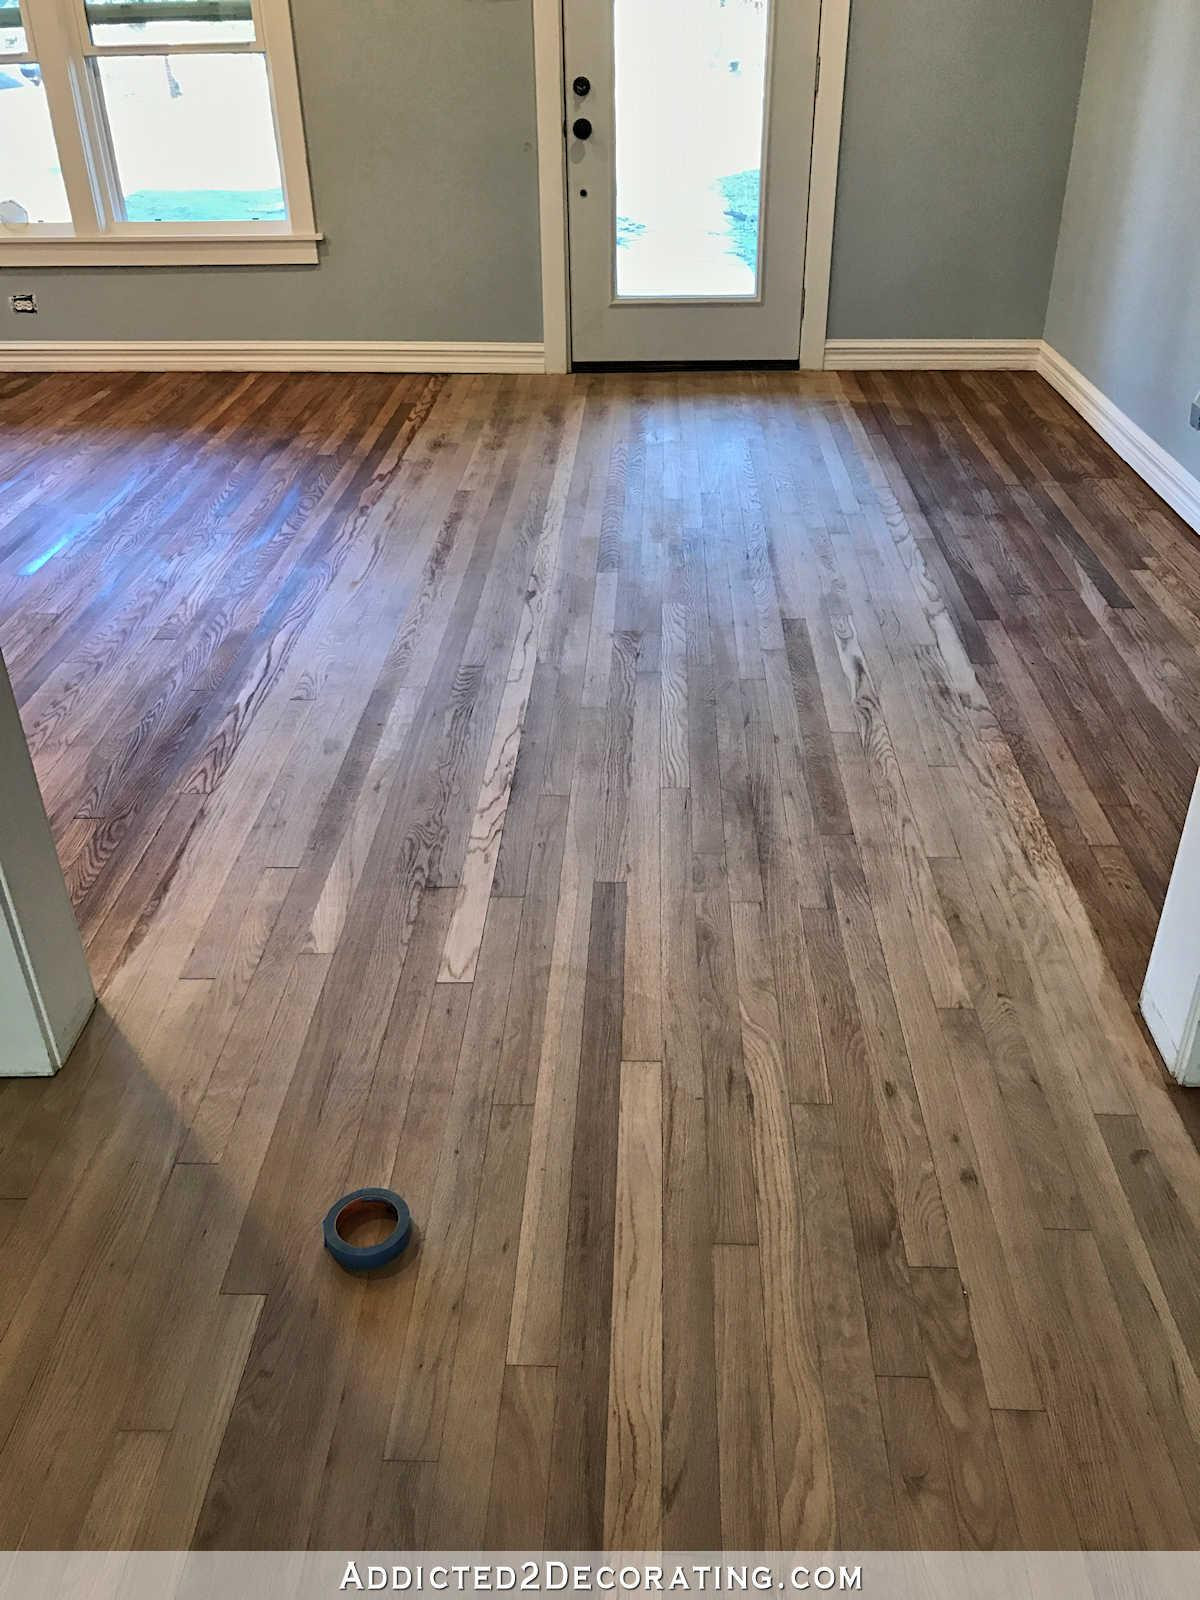 15 Nice How to Lay Hardwood Floor Over Concrete 2024 free download how to lay hardwood floor over concrete of luxury of diy wood floor refinishing collection with staining red oak hardwood floors 4 entryway and living room wood conditioner diy wood floor re